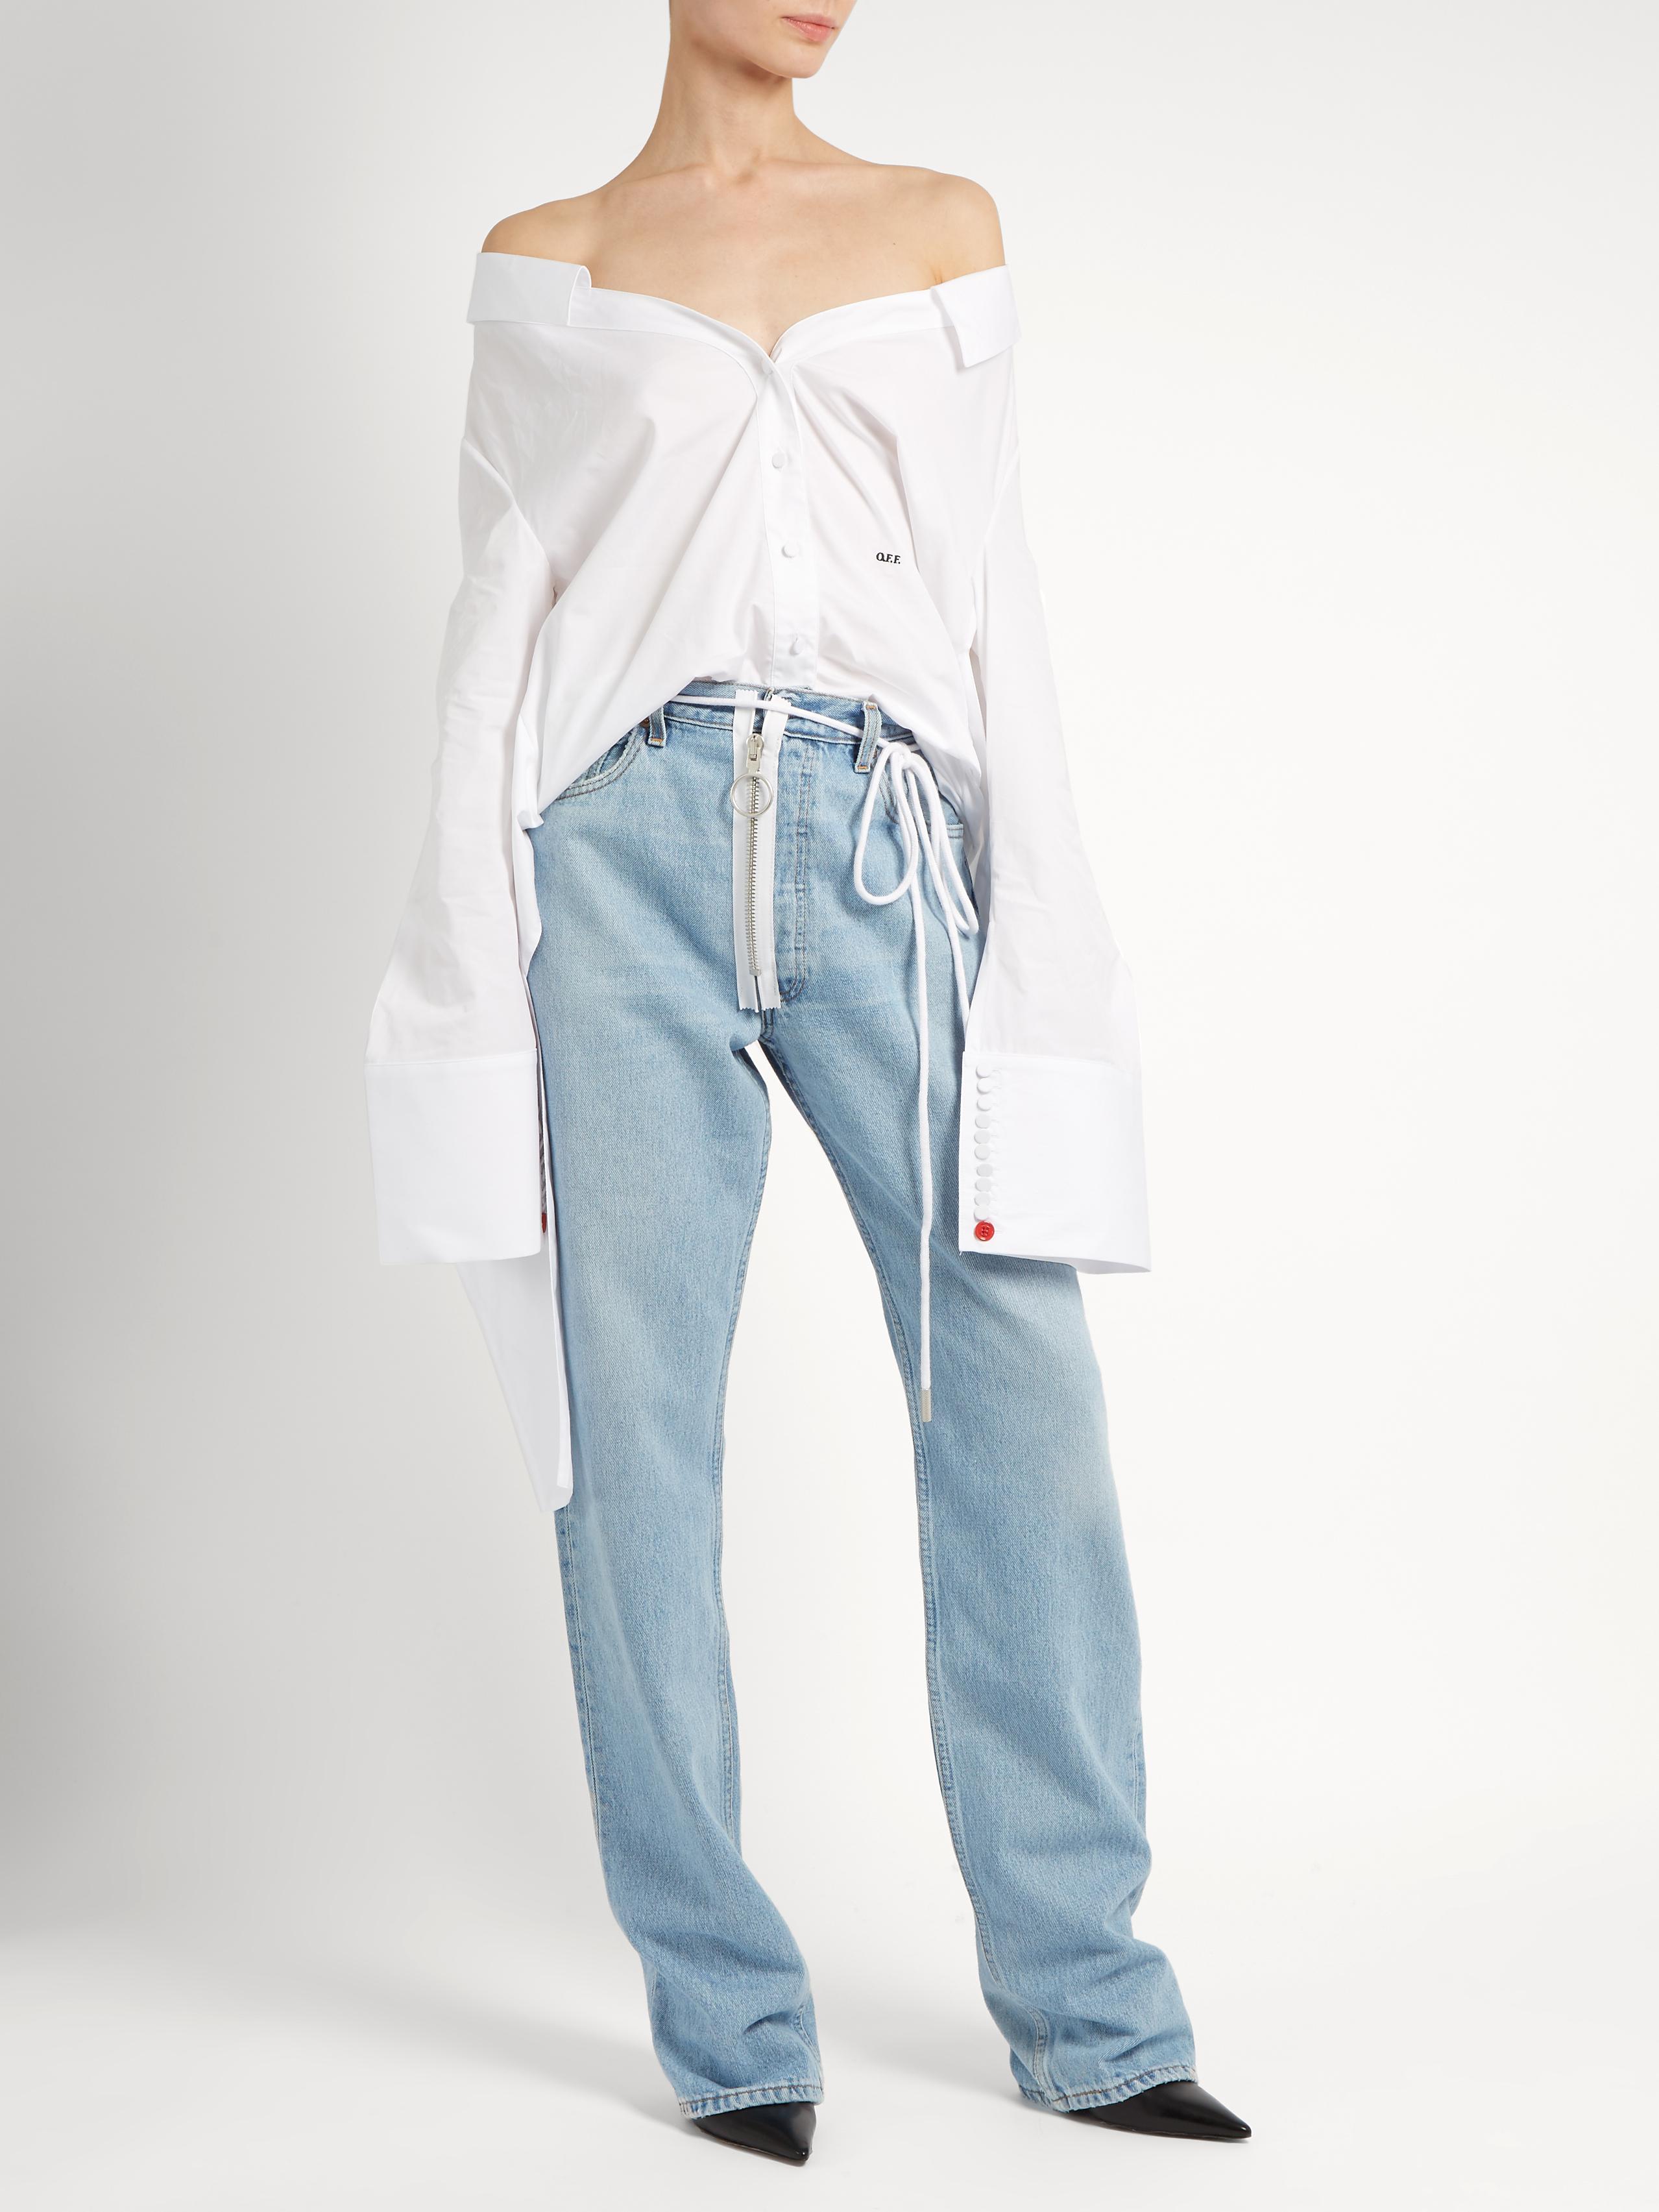 Levi's X Off White Best Selling, 58% OFF | bvh.edu.gt